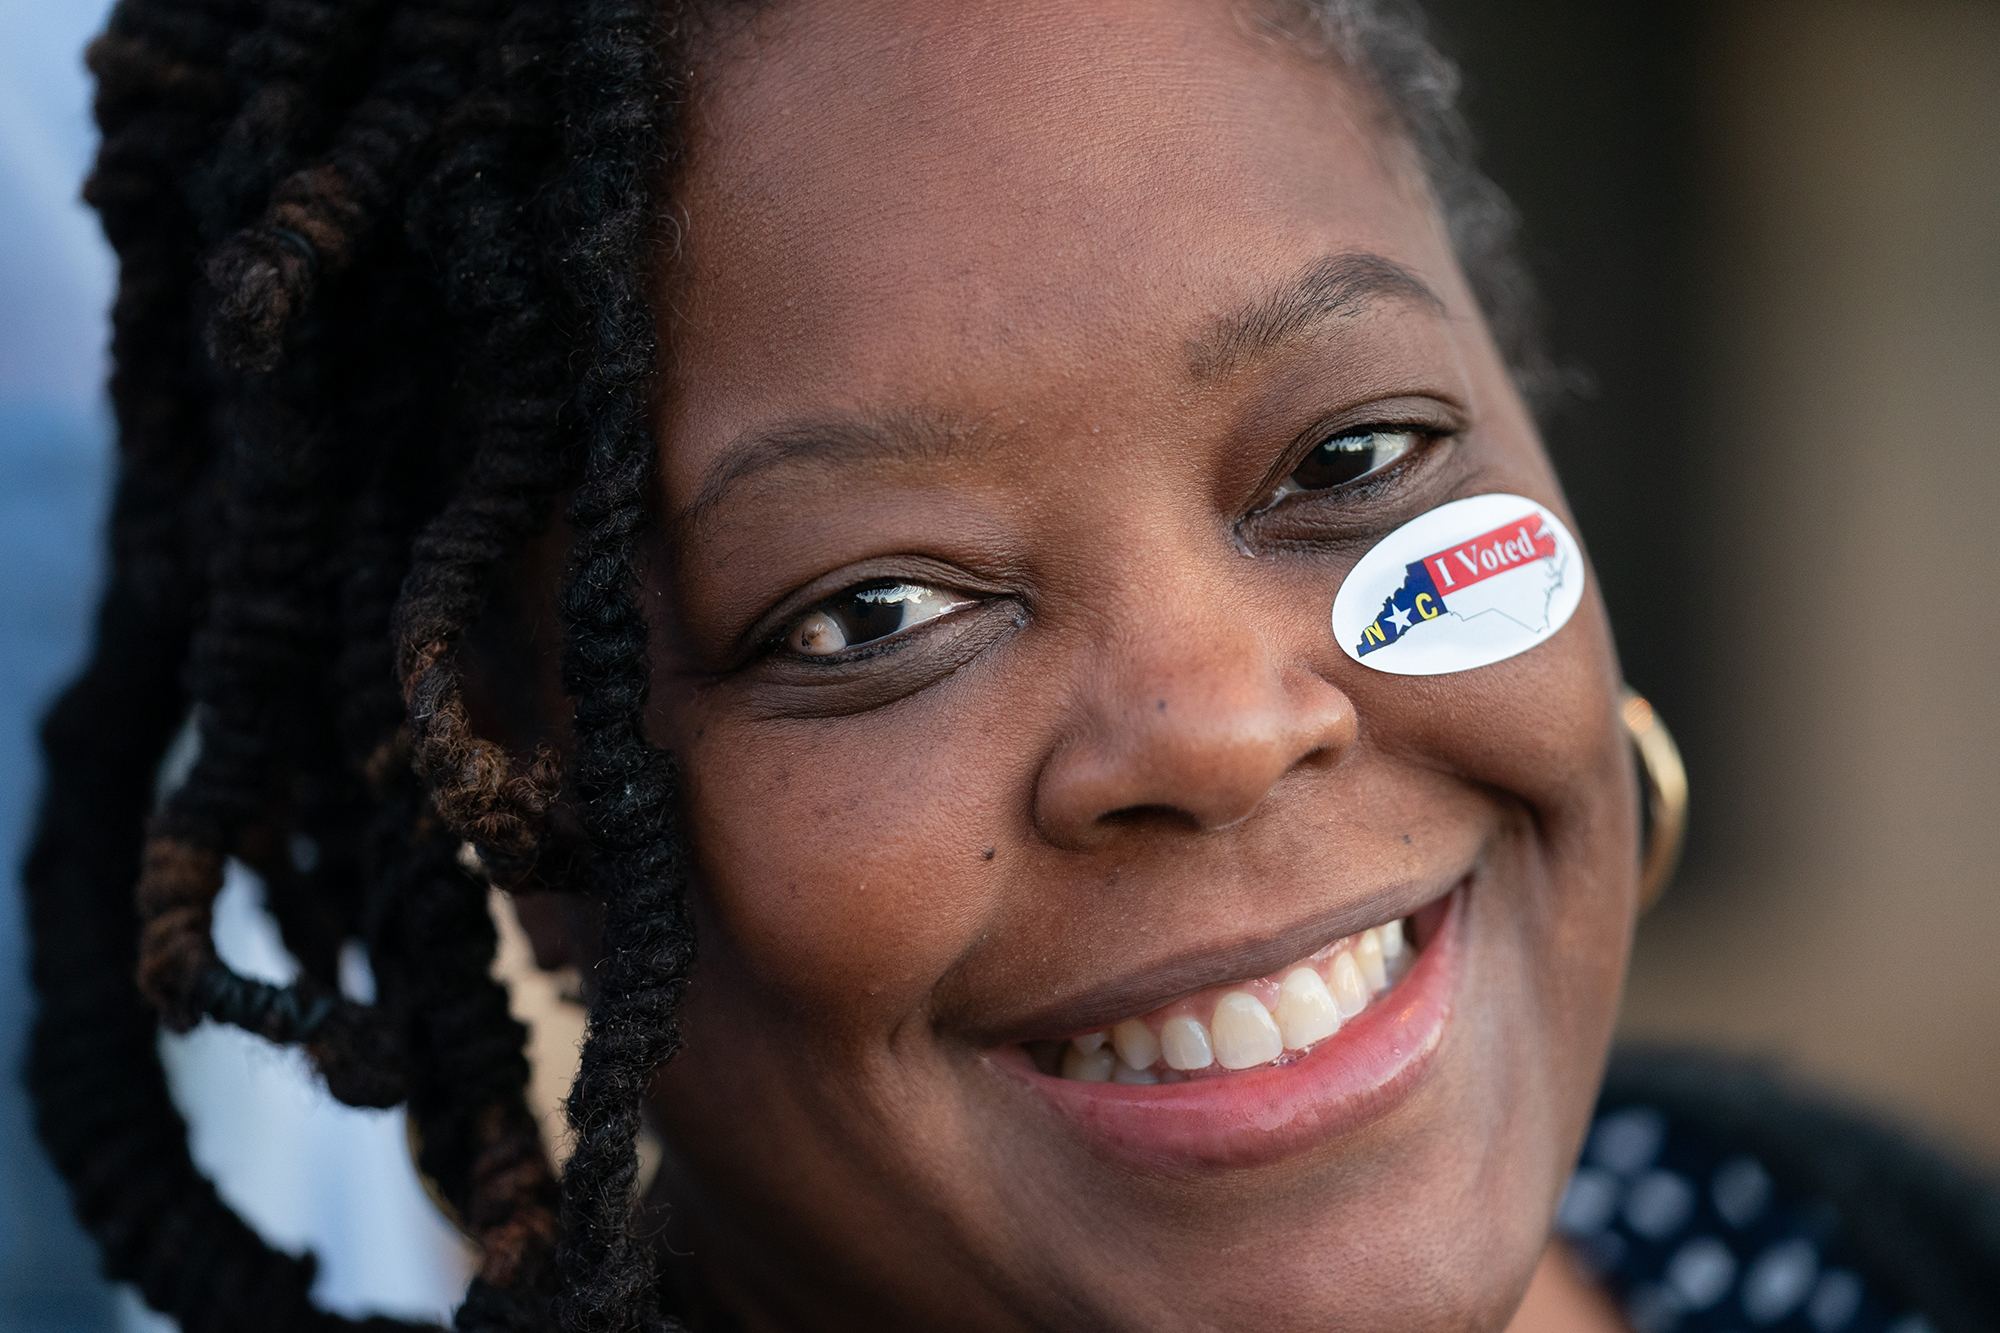 Lakeisha Hill smiles after putting a voting sticker on her face in Winston Salem, North Carolina, on Tuesday.